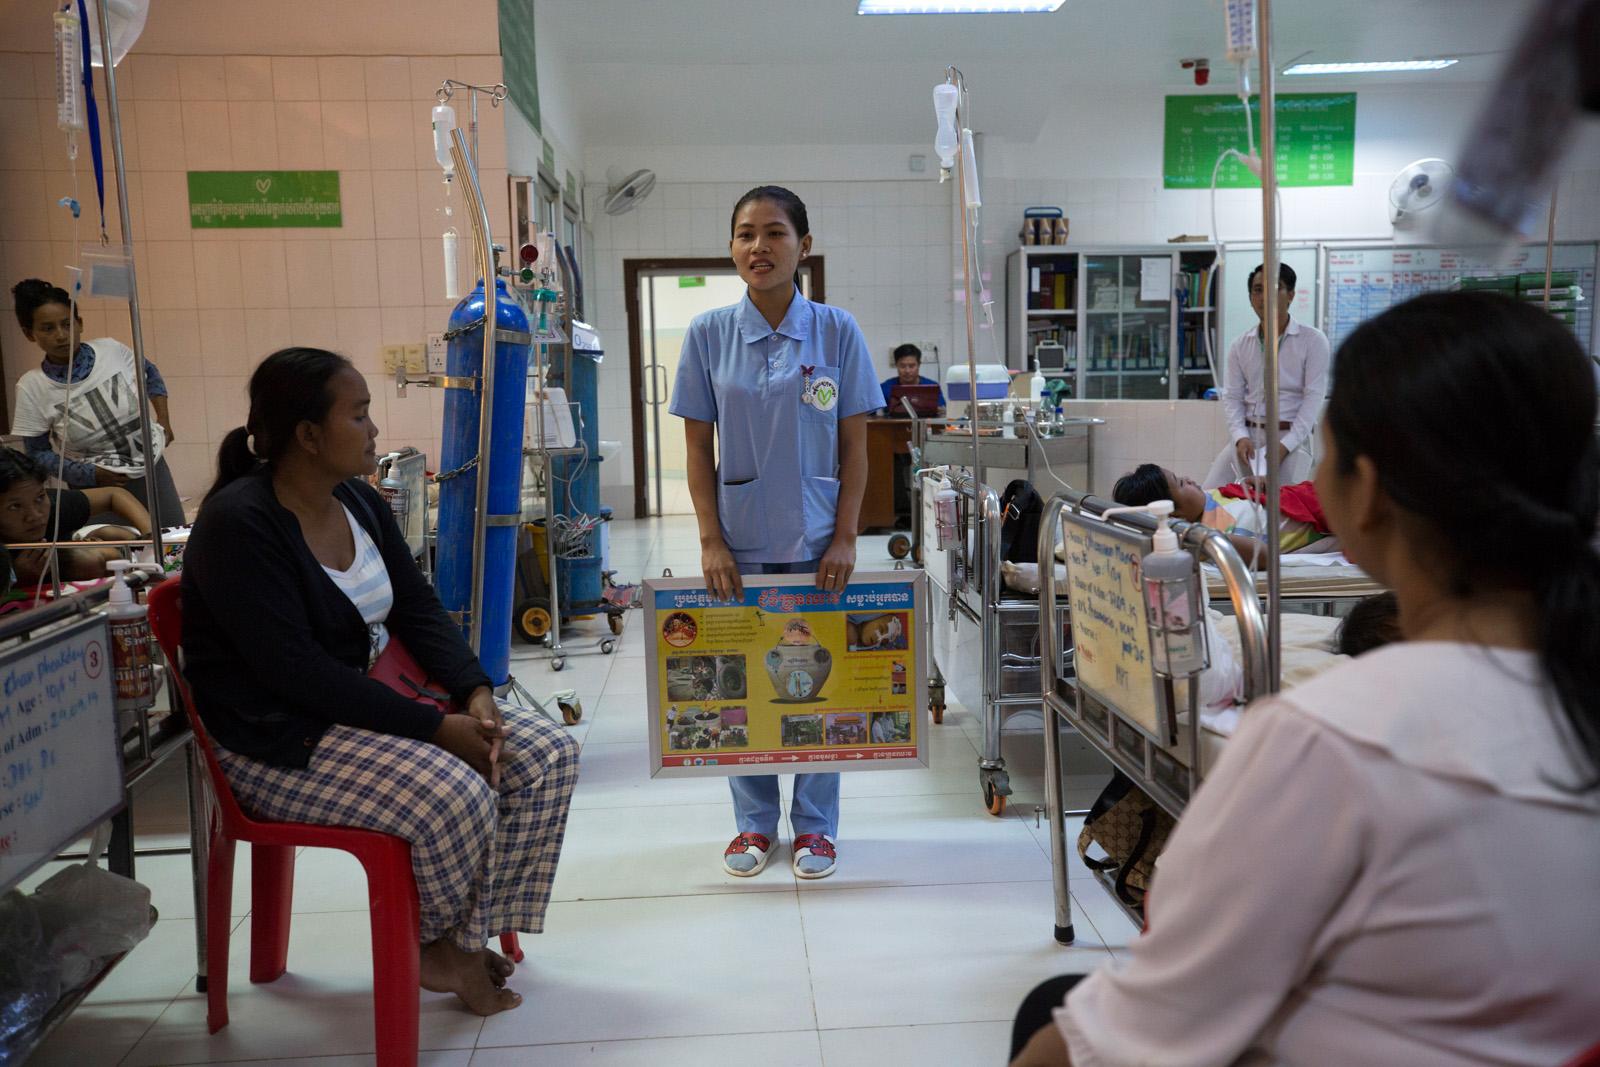 SOUTHEAST ASIA'S DENGUE EPIDEMIC - Due to the influx of dengue fever patients this year the...